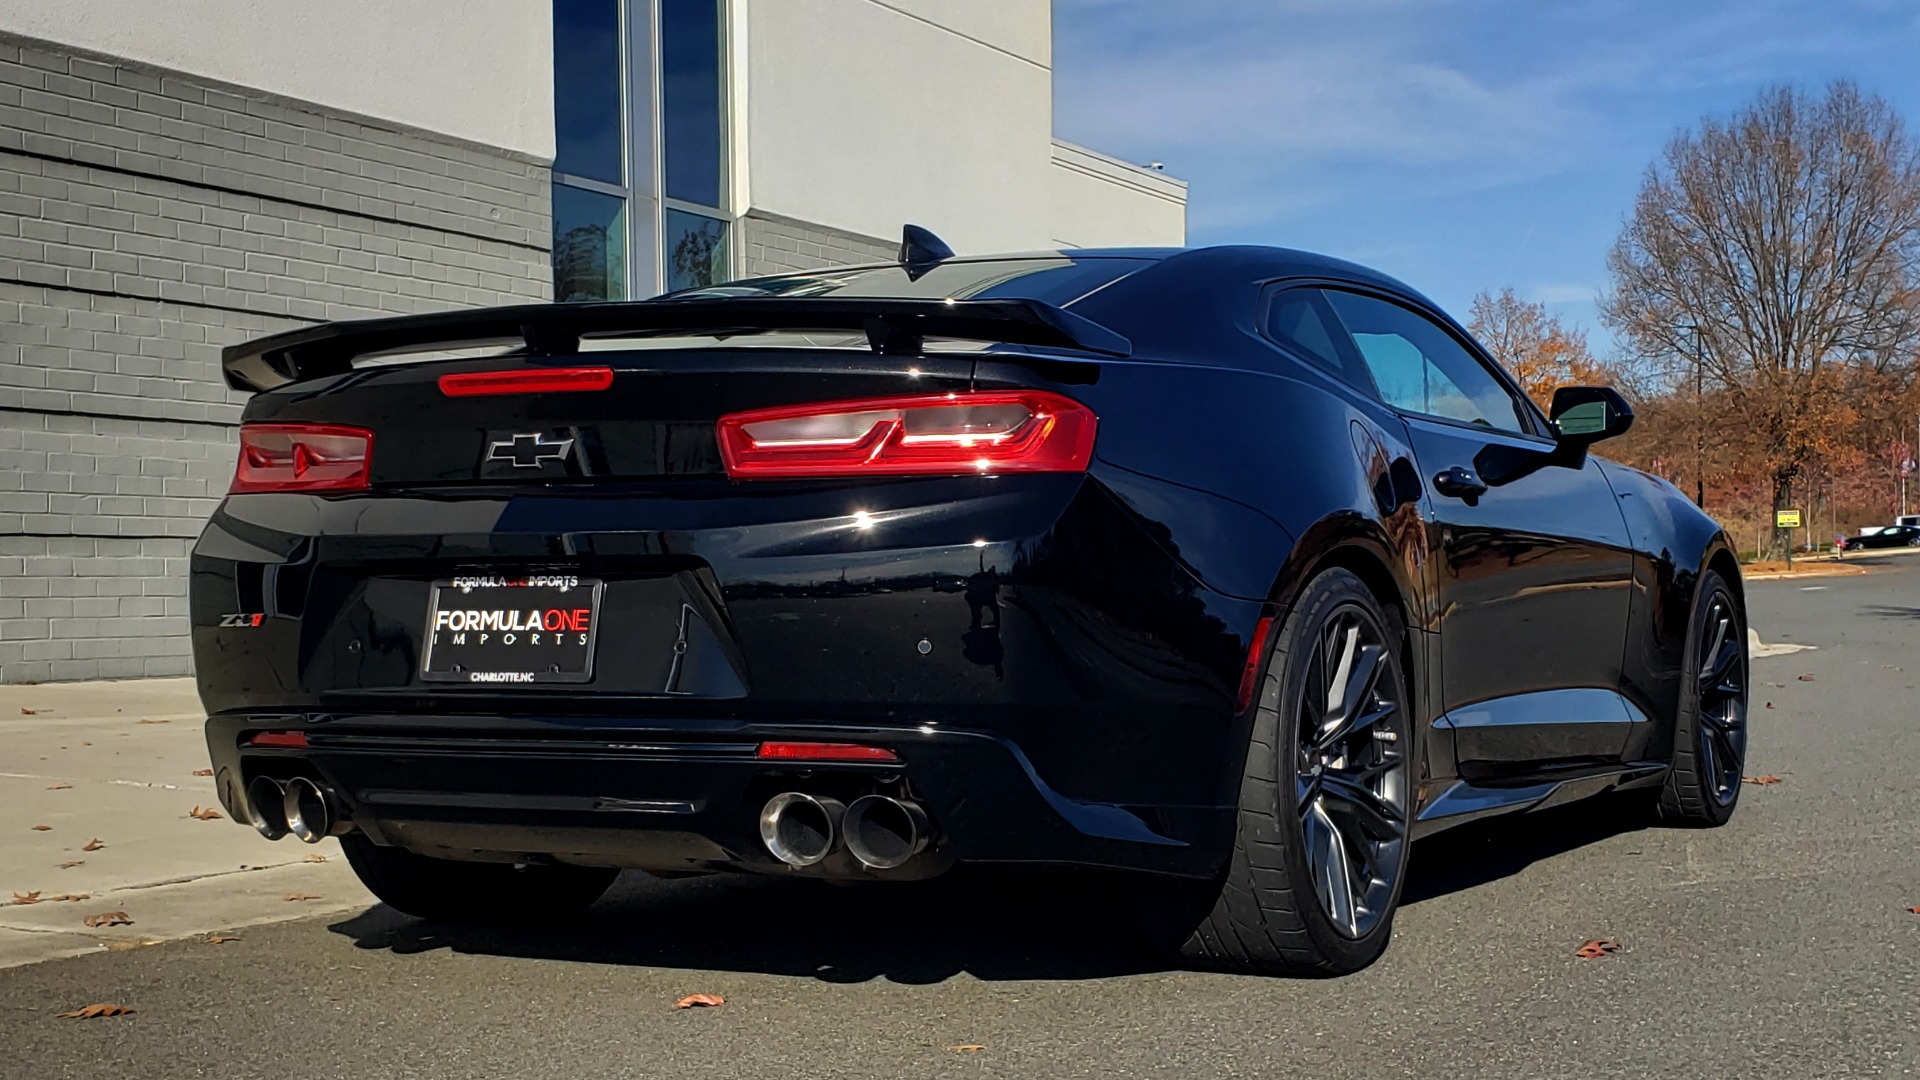 Used 2017 Chevrolet CAMARO ZL1 COUPE / 6.2L SC LT4 V8 (650HP) / 6-SPD MAN / NAV / BOSE / REARVIEW for sale $58,995 at Formula Imports in Charlotte NC 28227 9